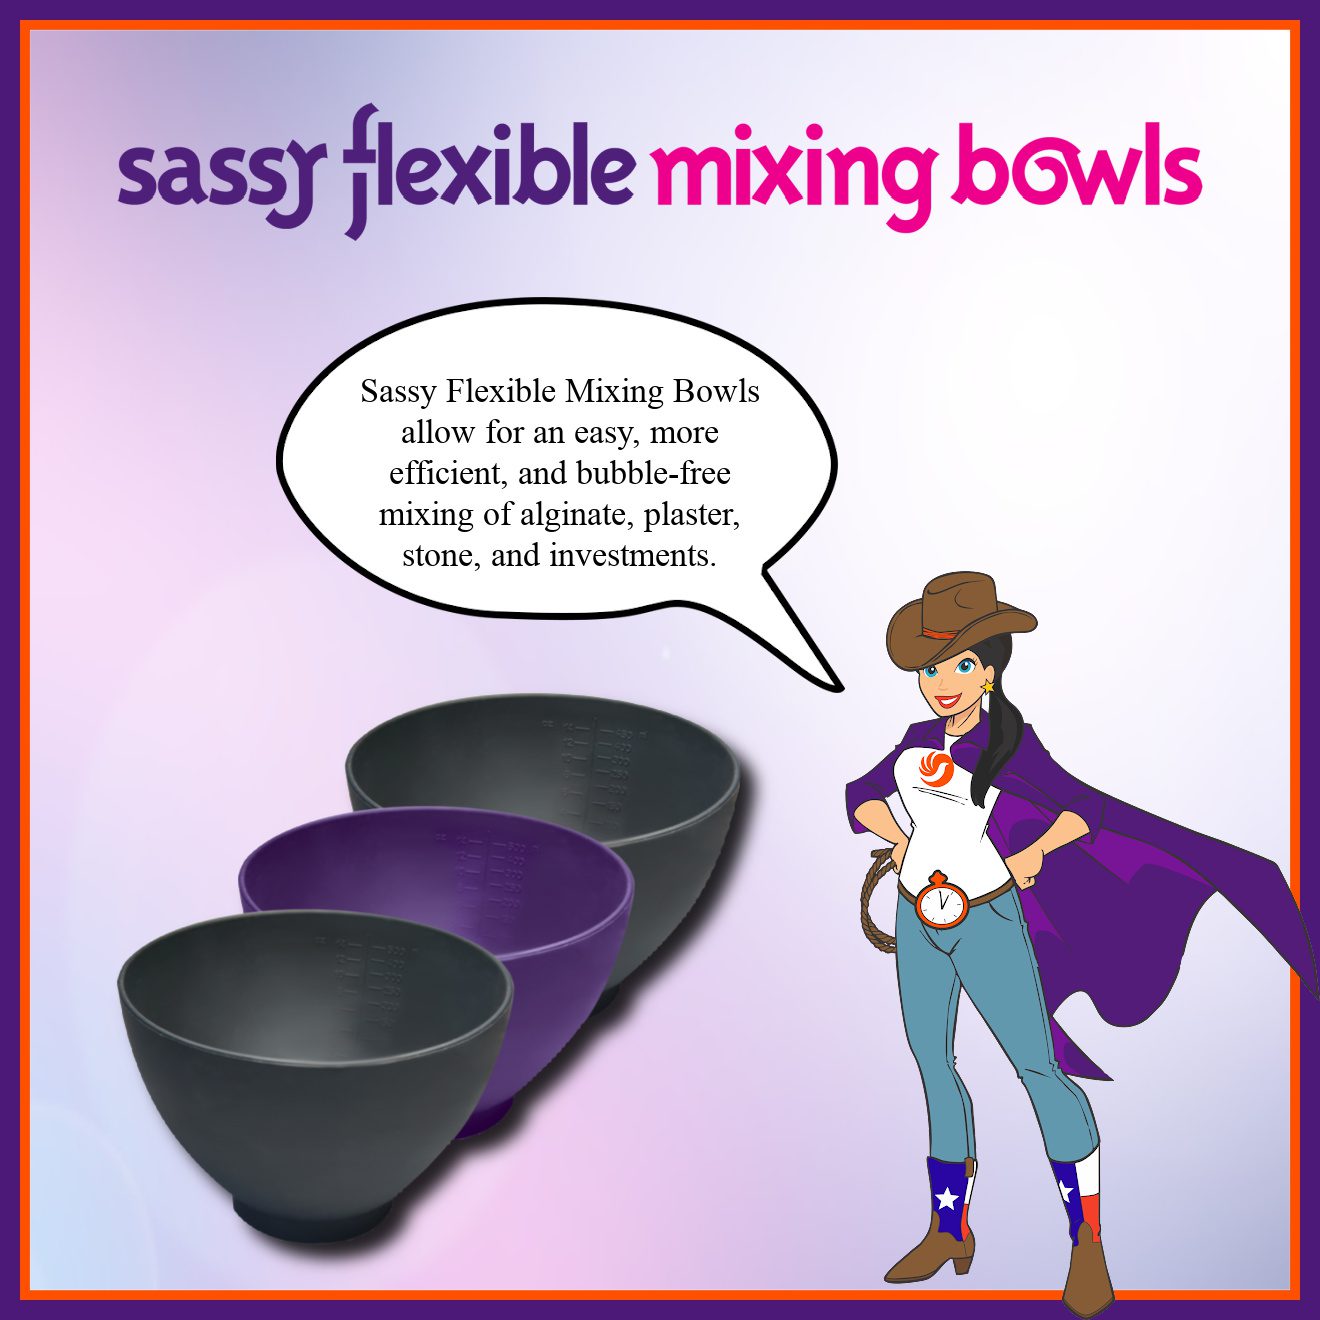 Silicone Mixing Bowl - American Dental Accessories, Inc.